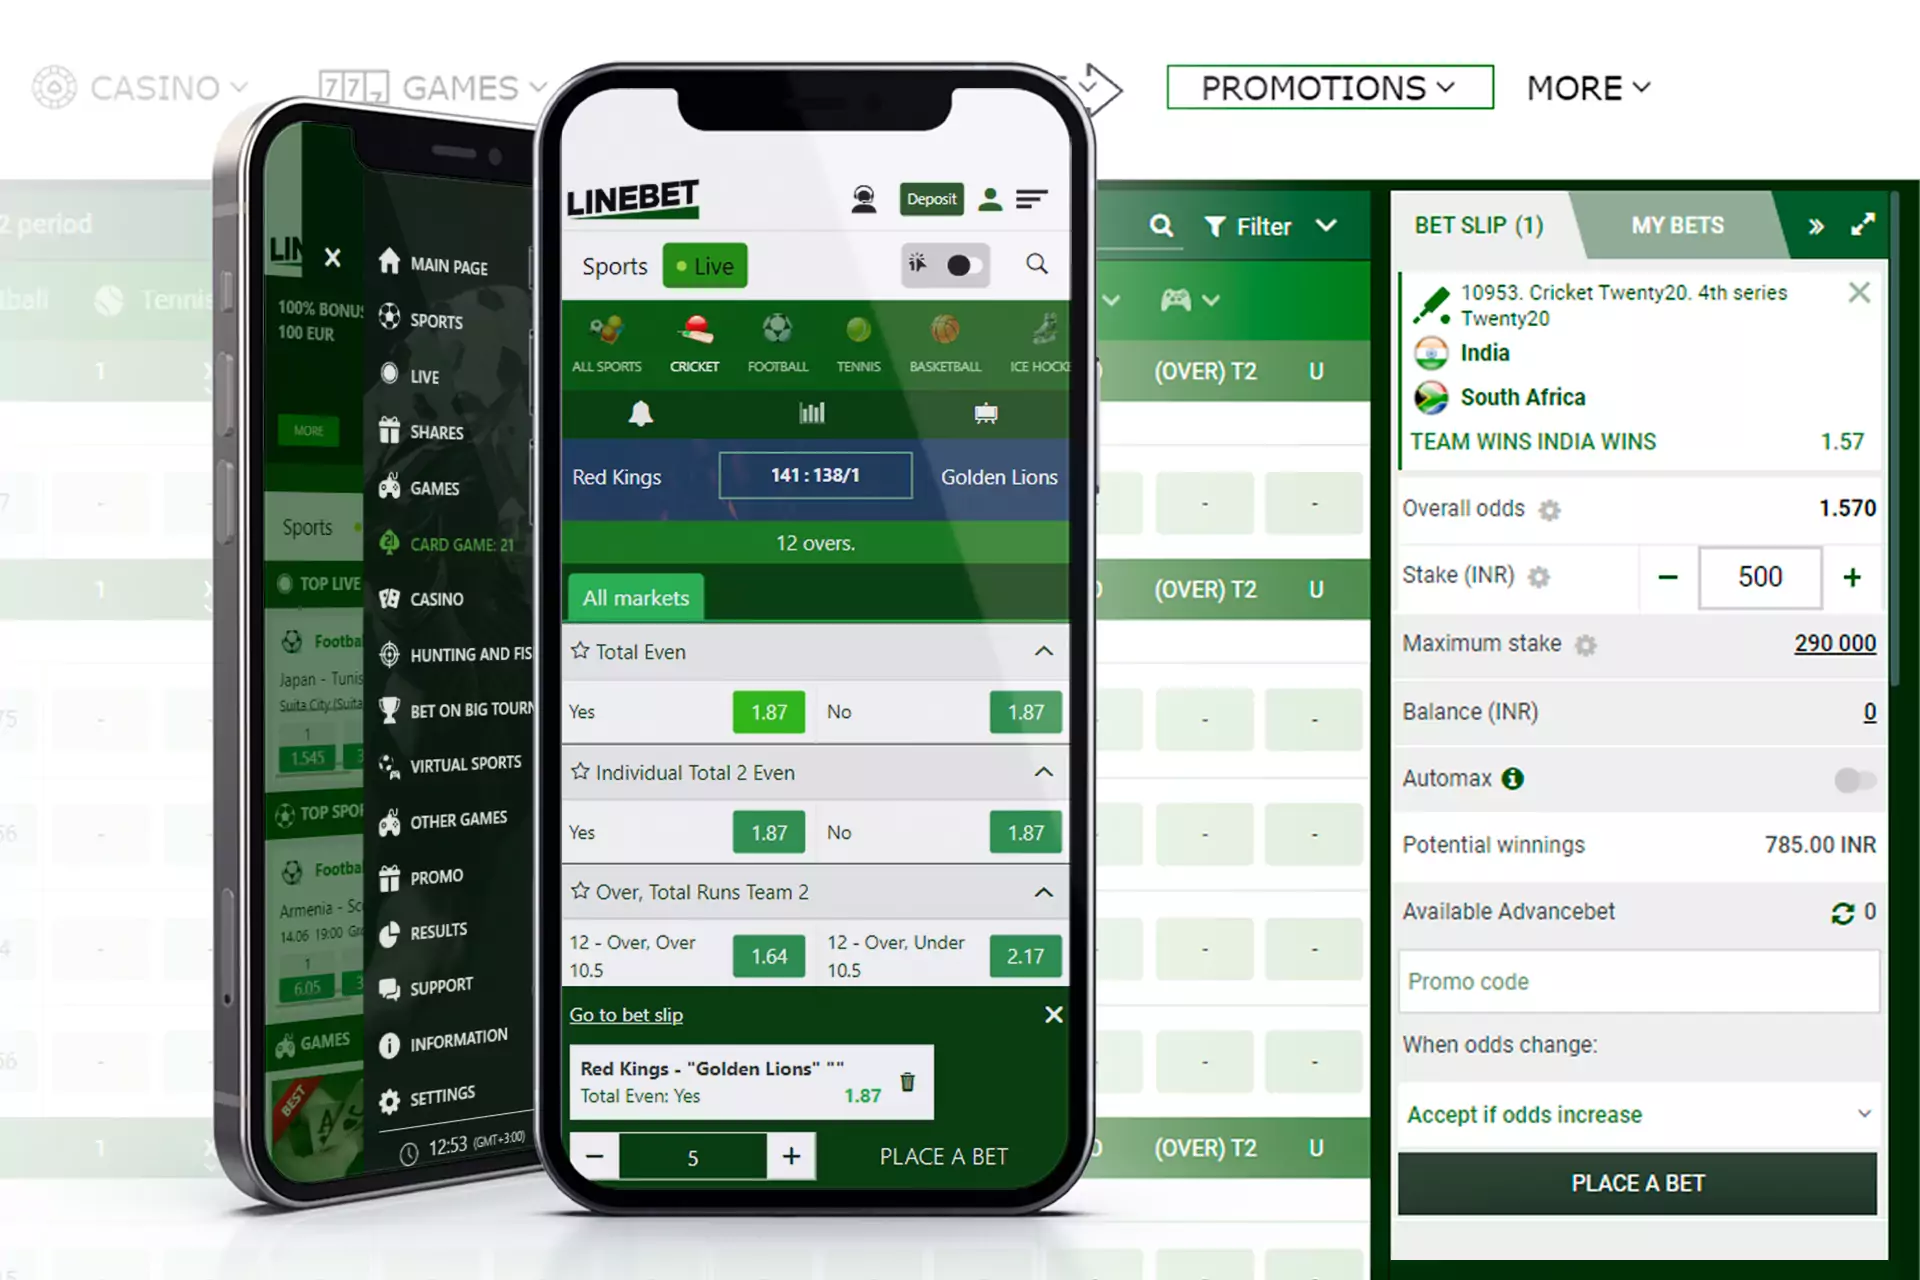 You can easily place a bet either from a PC or a smartphone.